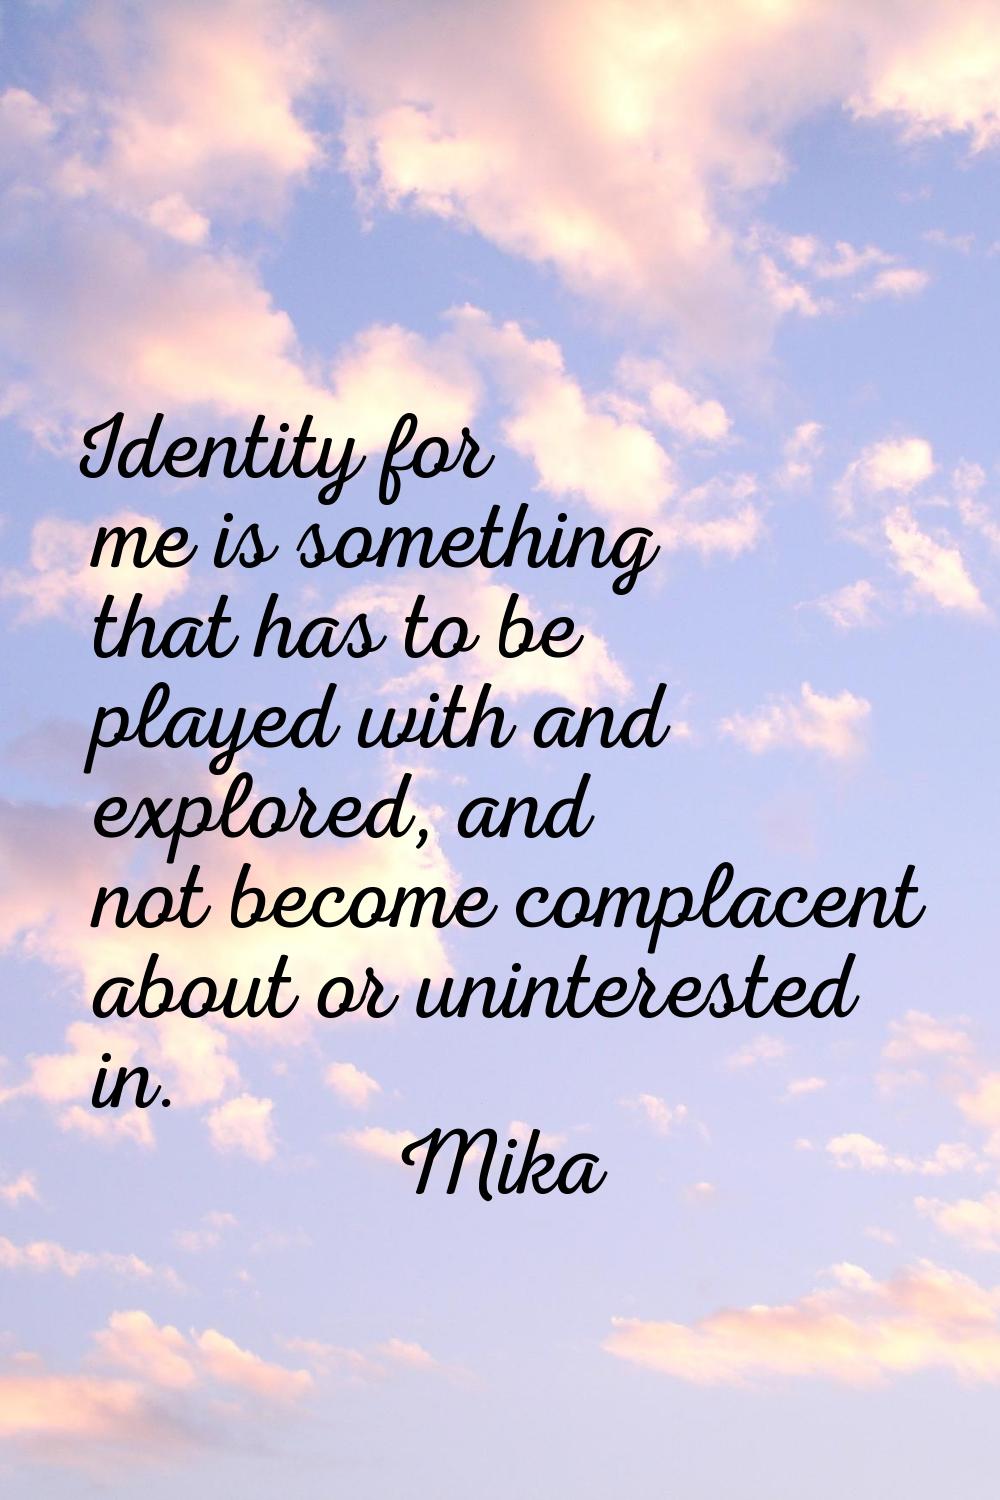 Identity for me is something that has to be played with and explored, and not become complacent abo